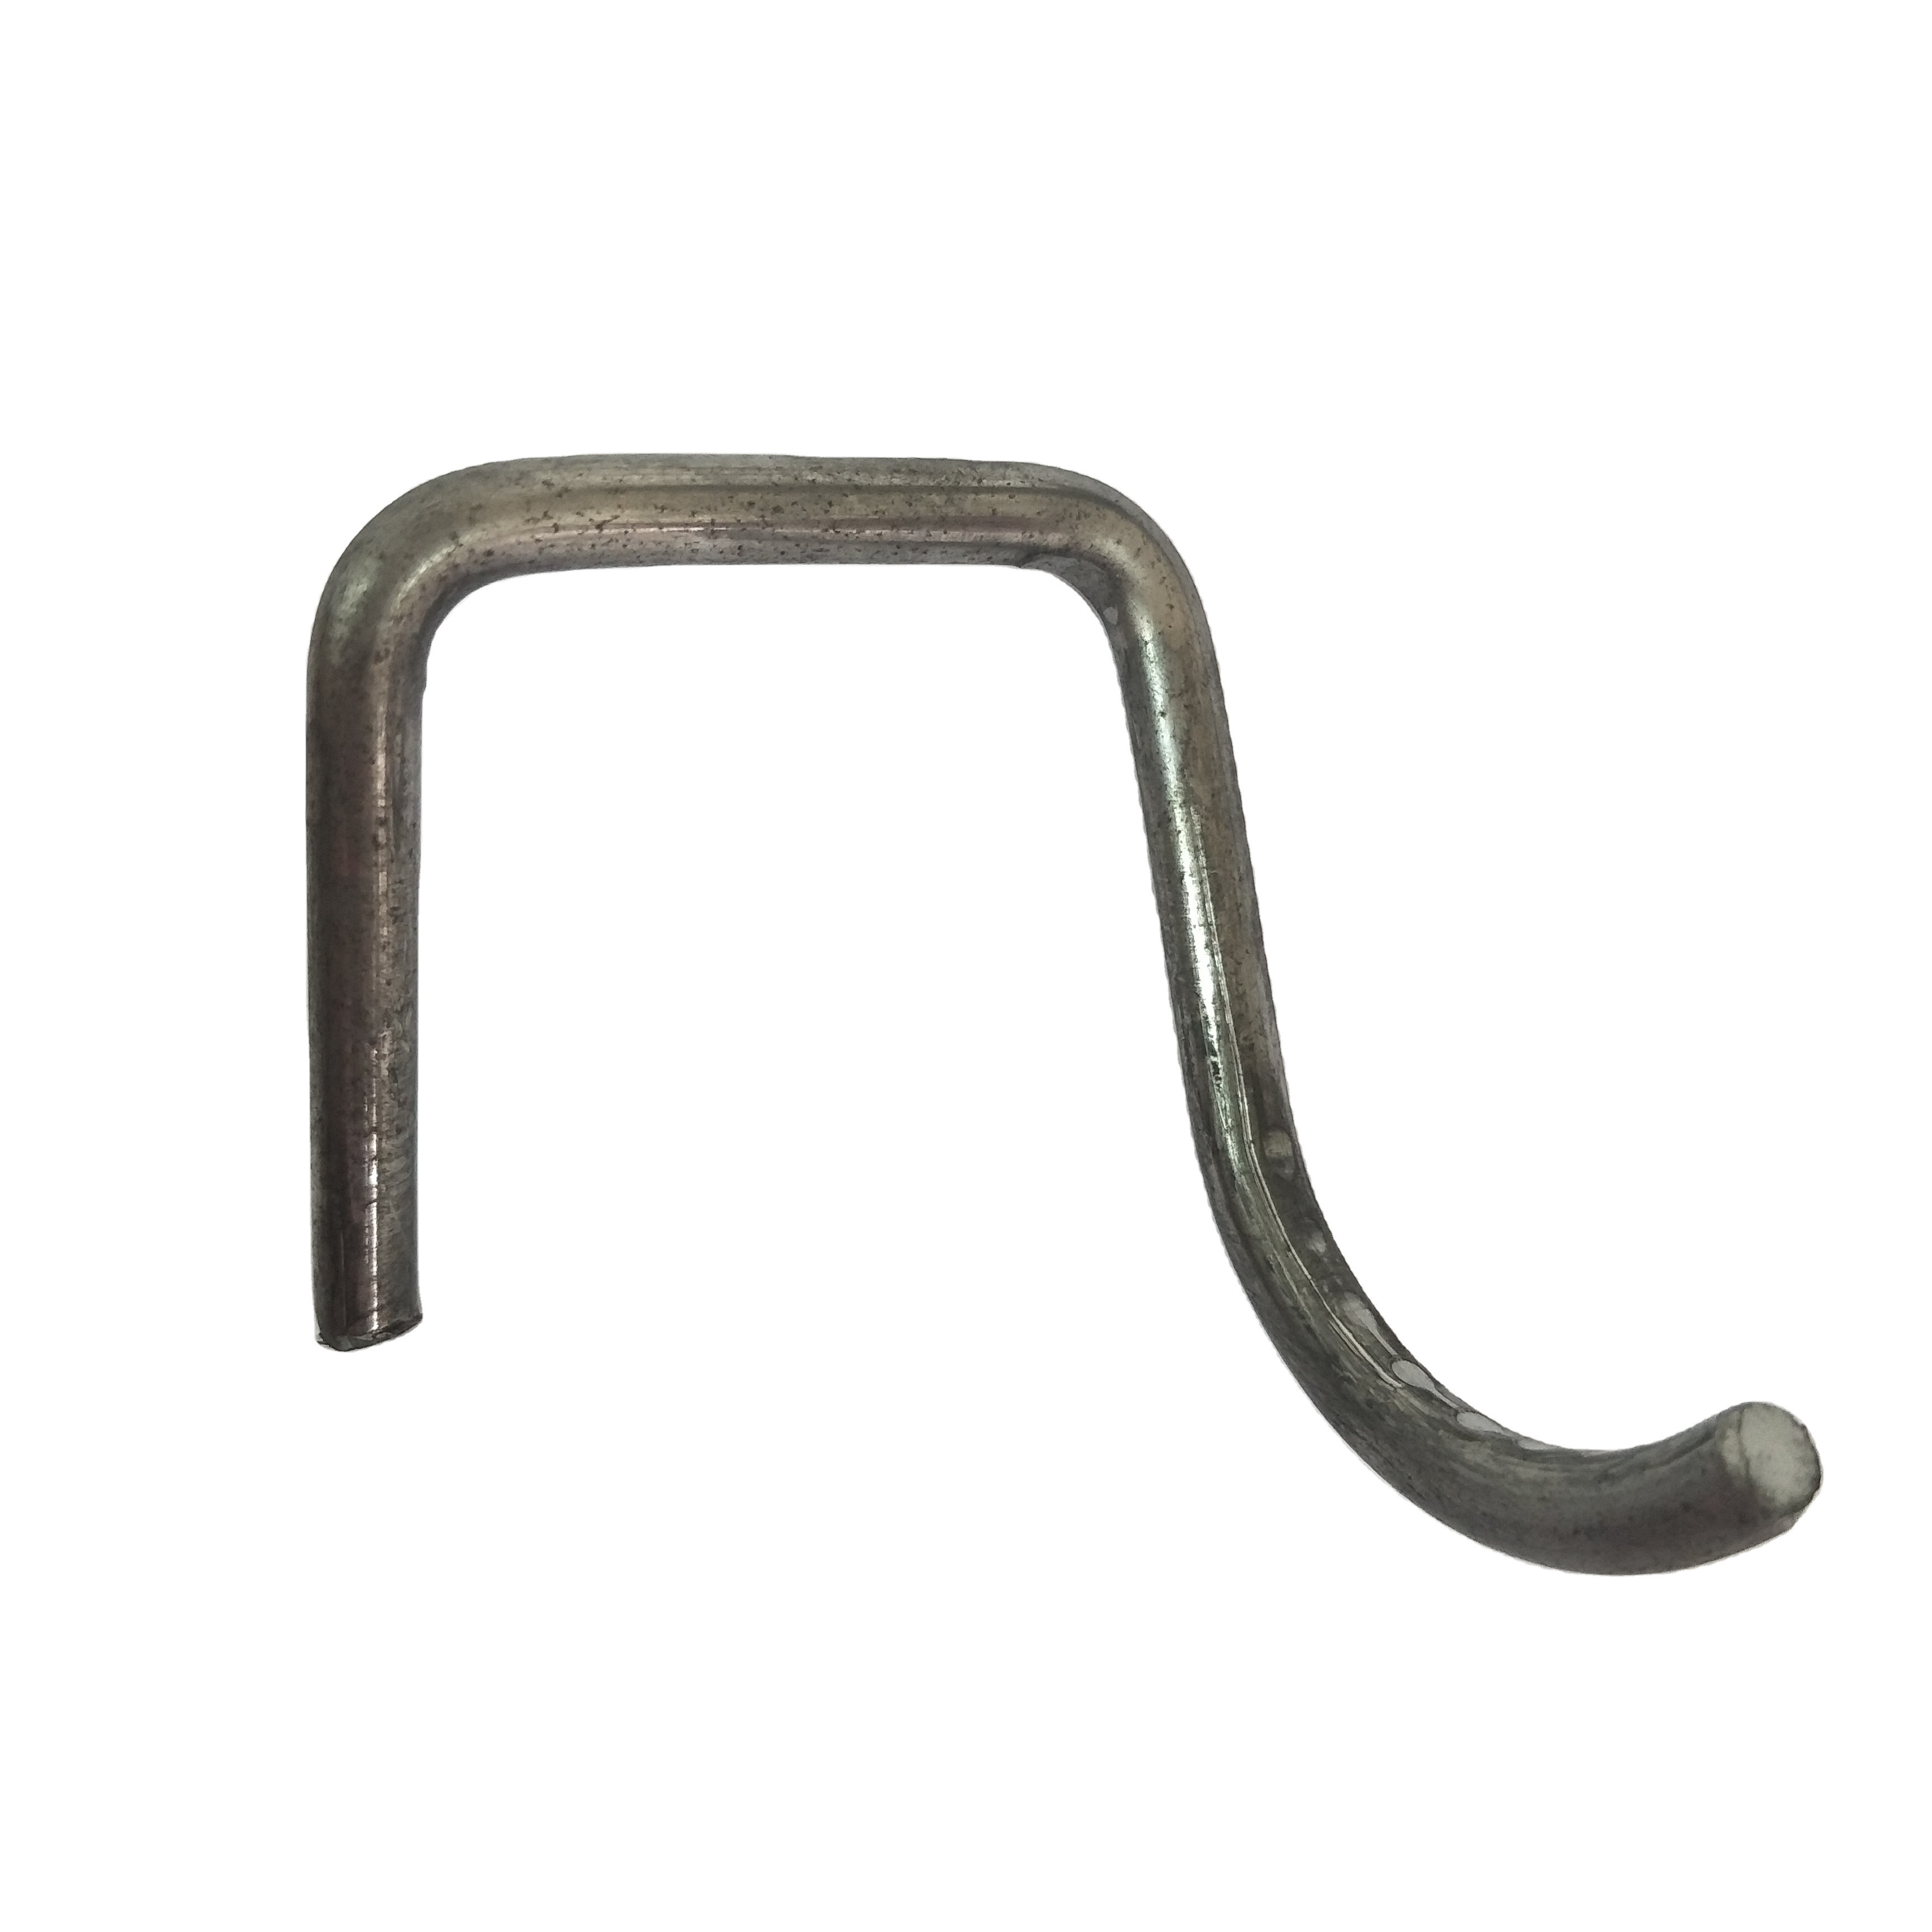 Custom shape stainless steel wire bending formed spring lifting handle